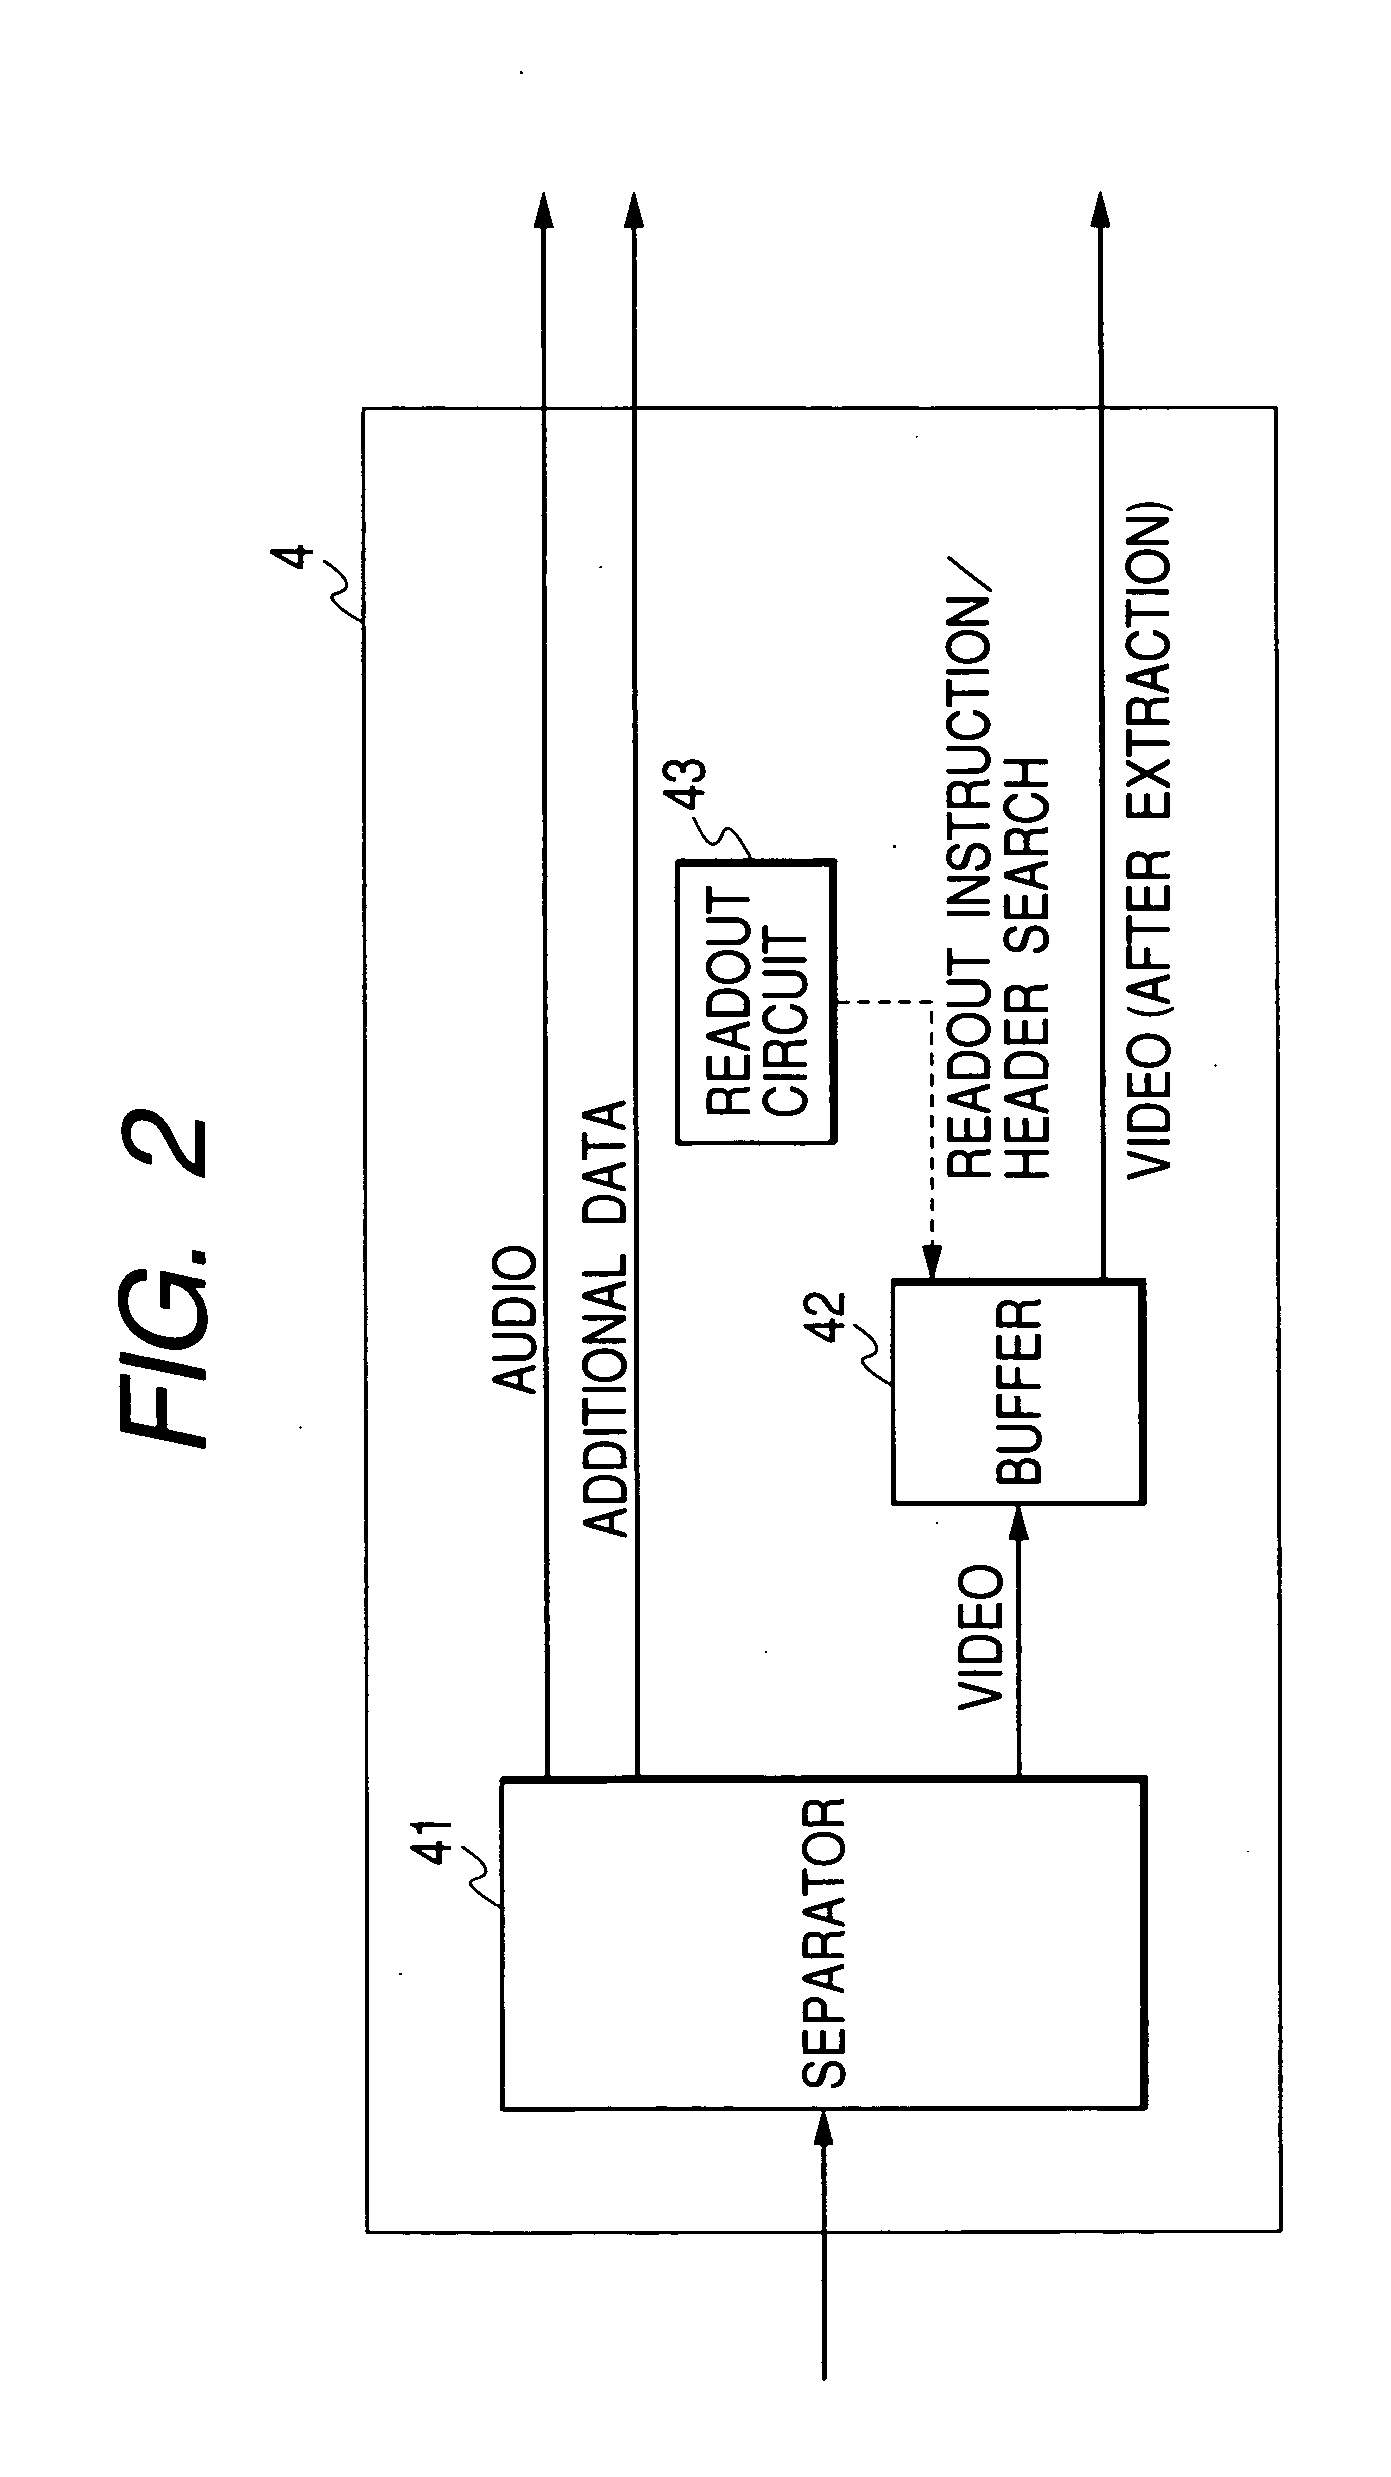 Transcoder and imaging apparatus for converting an encoding system of video signal